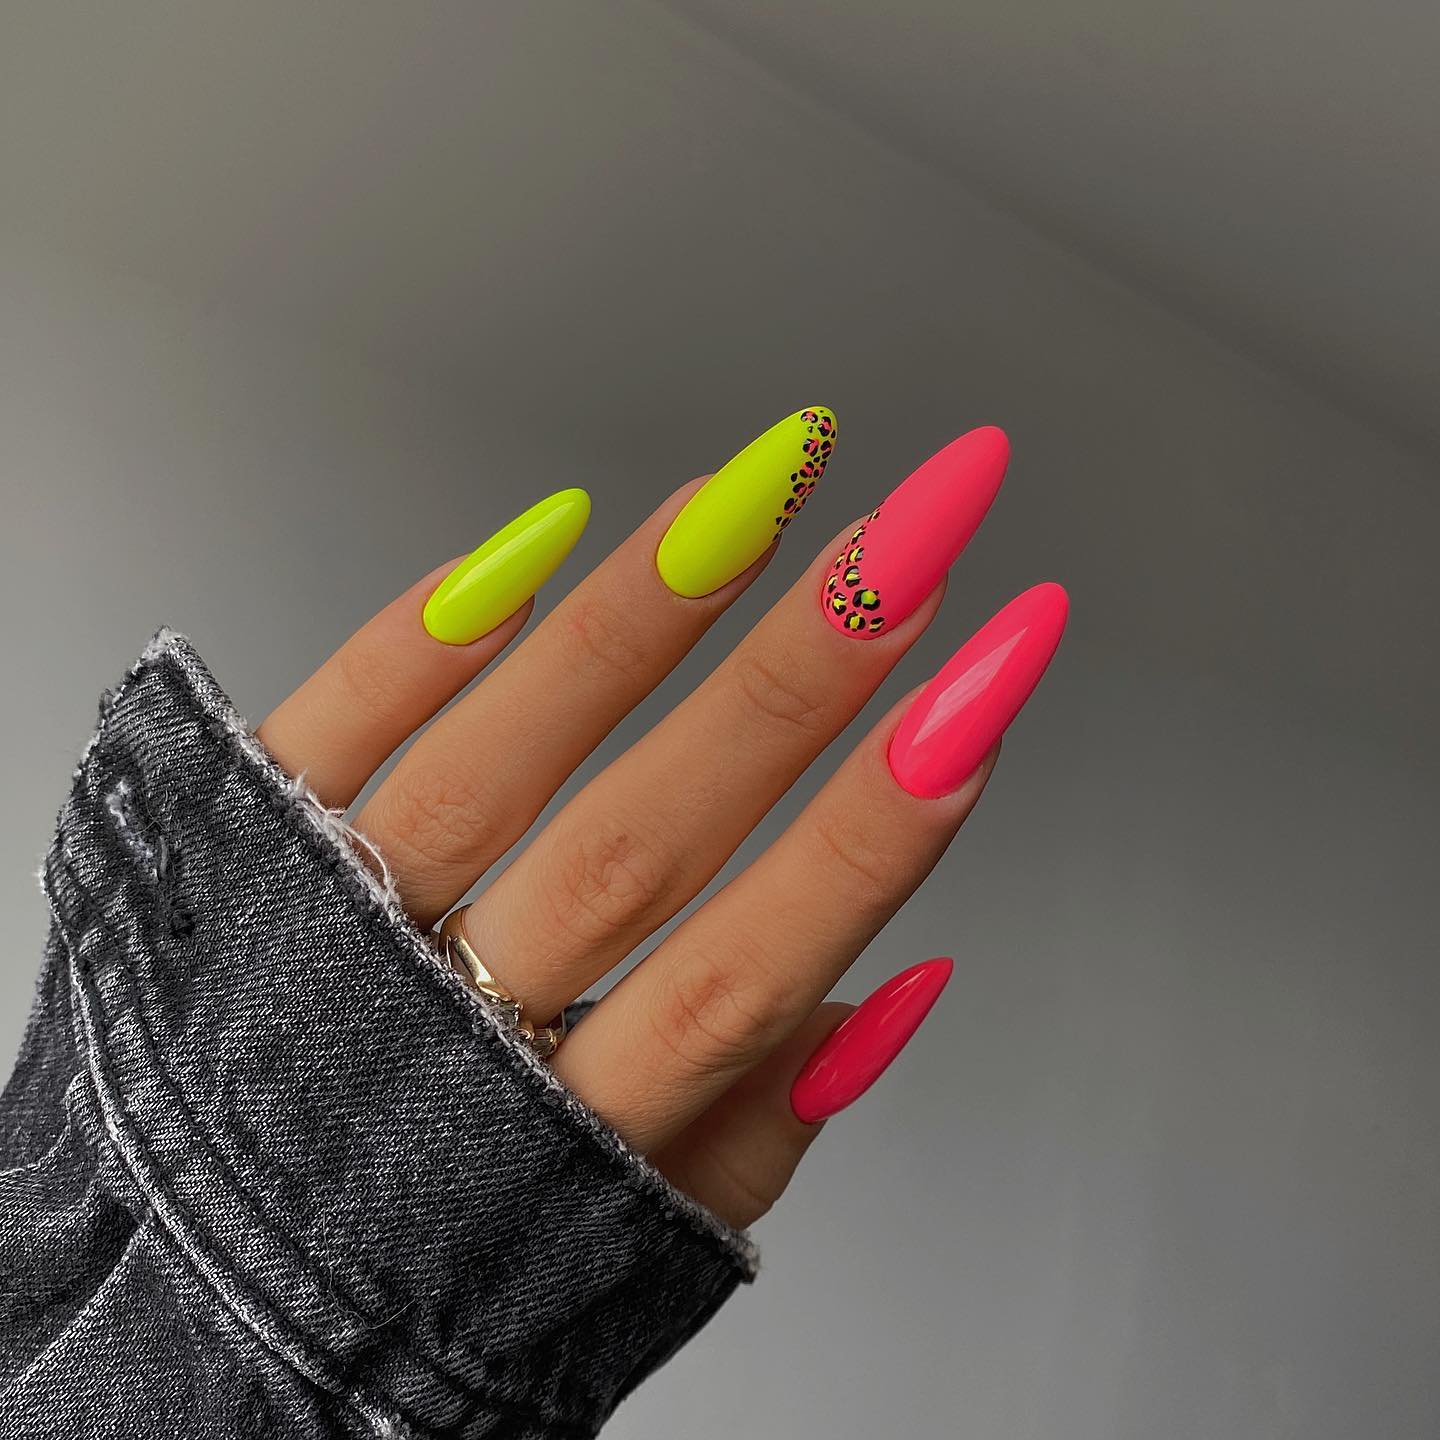 Neon Gradient Nail Art - May contain traces of polish